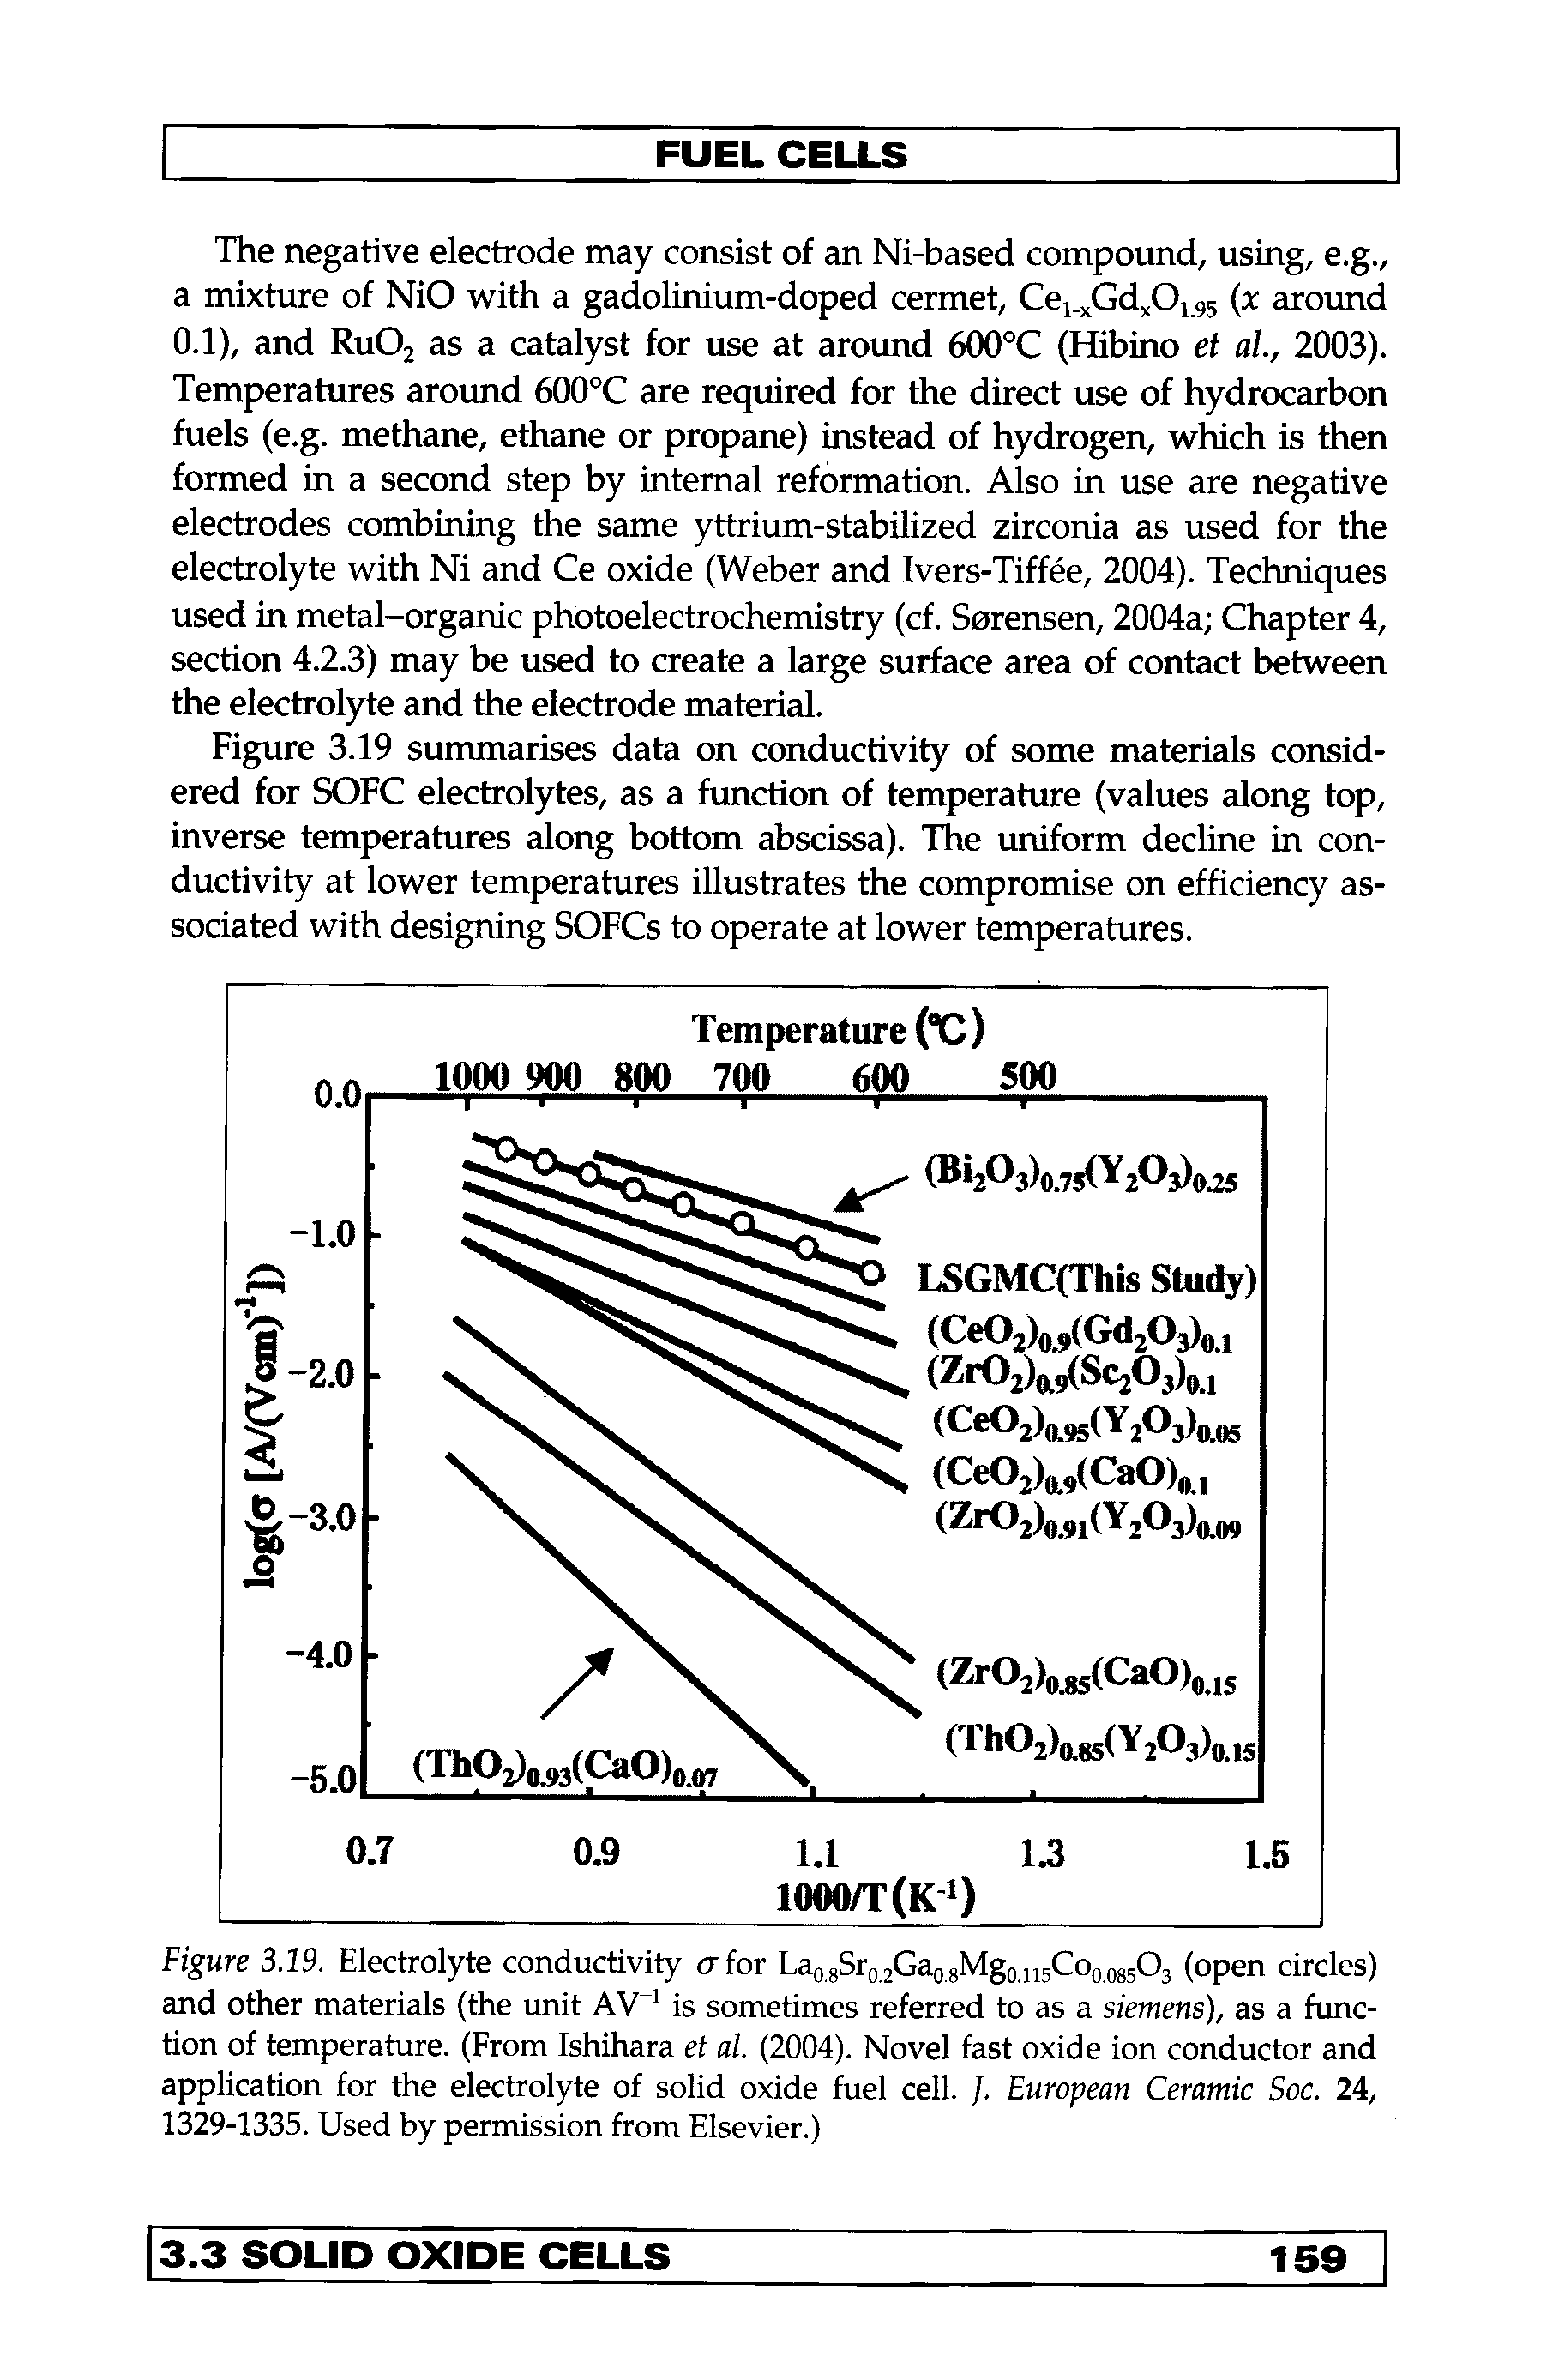 Figure 3.19. Electrolyte conductivity cr for Lag gSr , jGaj gMgo njCoo 085O3 (open circles) and other materials (the unit AV is sometimes referred to as a siemens), as a function of temperature. (From Ishihara et al. (2004). Novel fast oxide ion conductor and application for the electrolyte of solid oxide fuel cell. /. European Ceramic Soc. 24, 1329-1335. Used by permission from Elsevier.)...